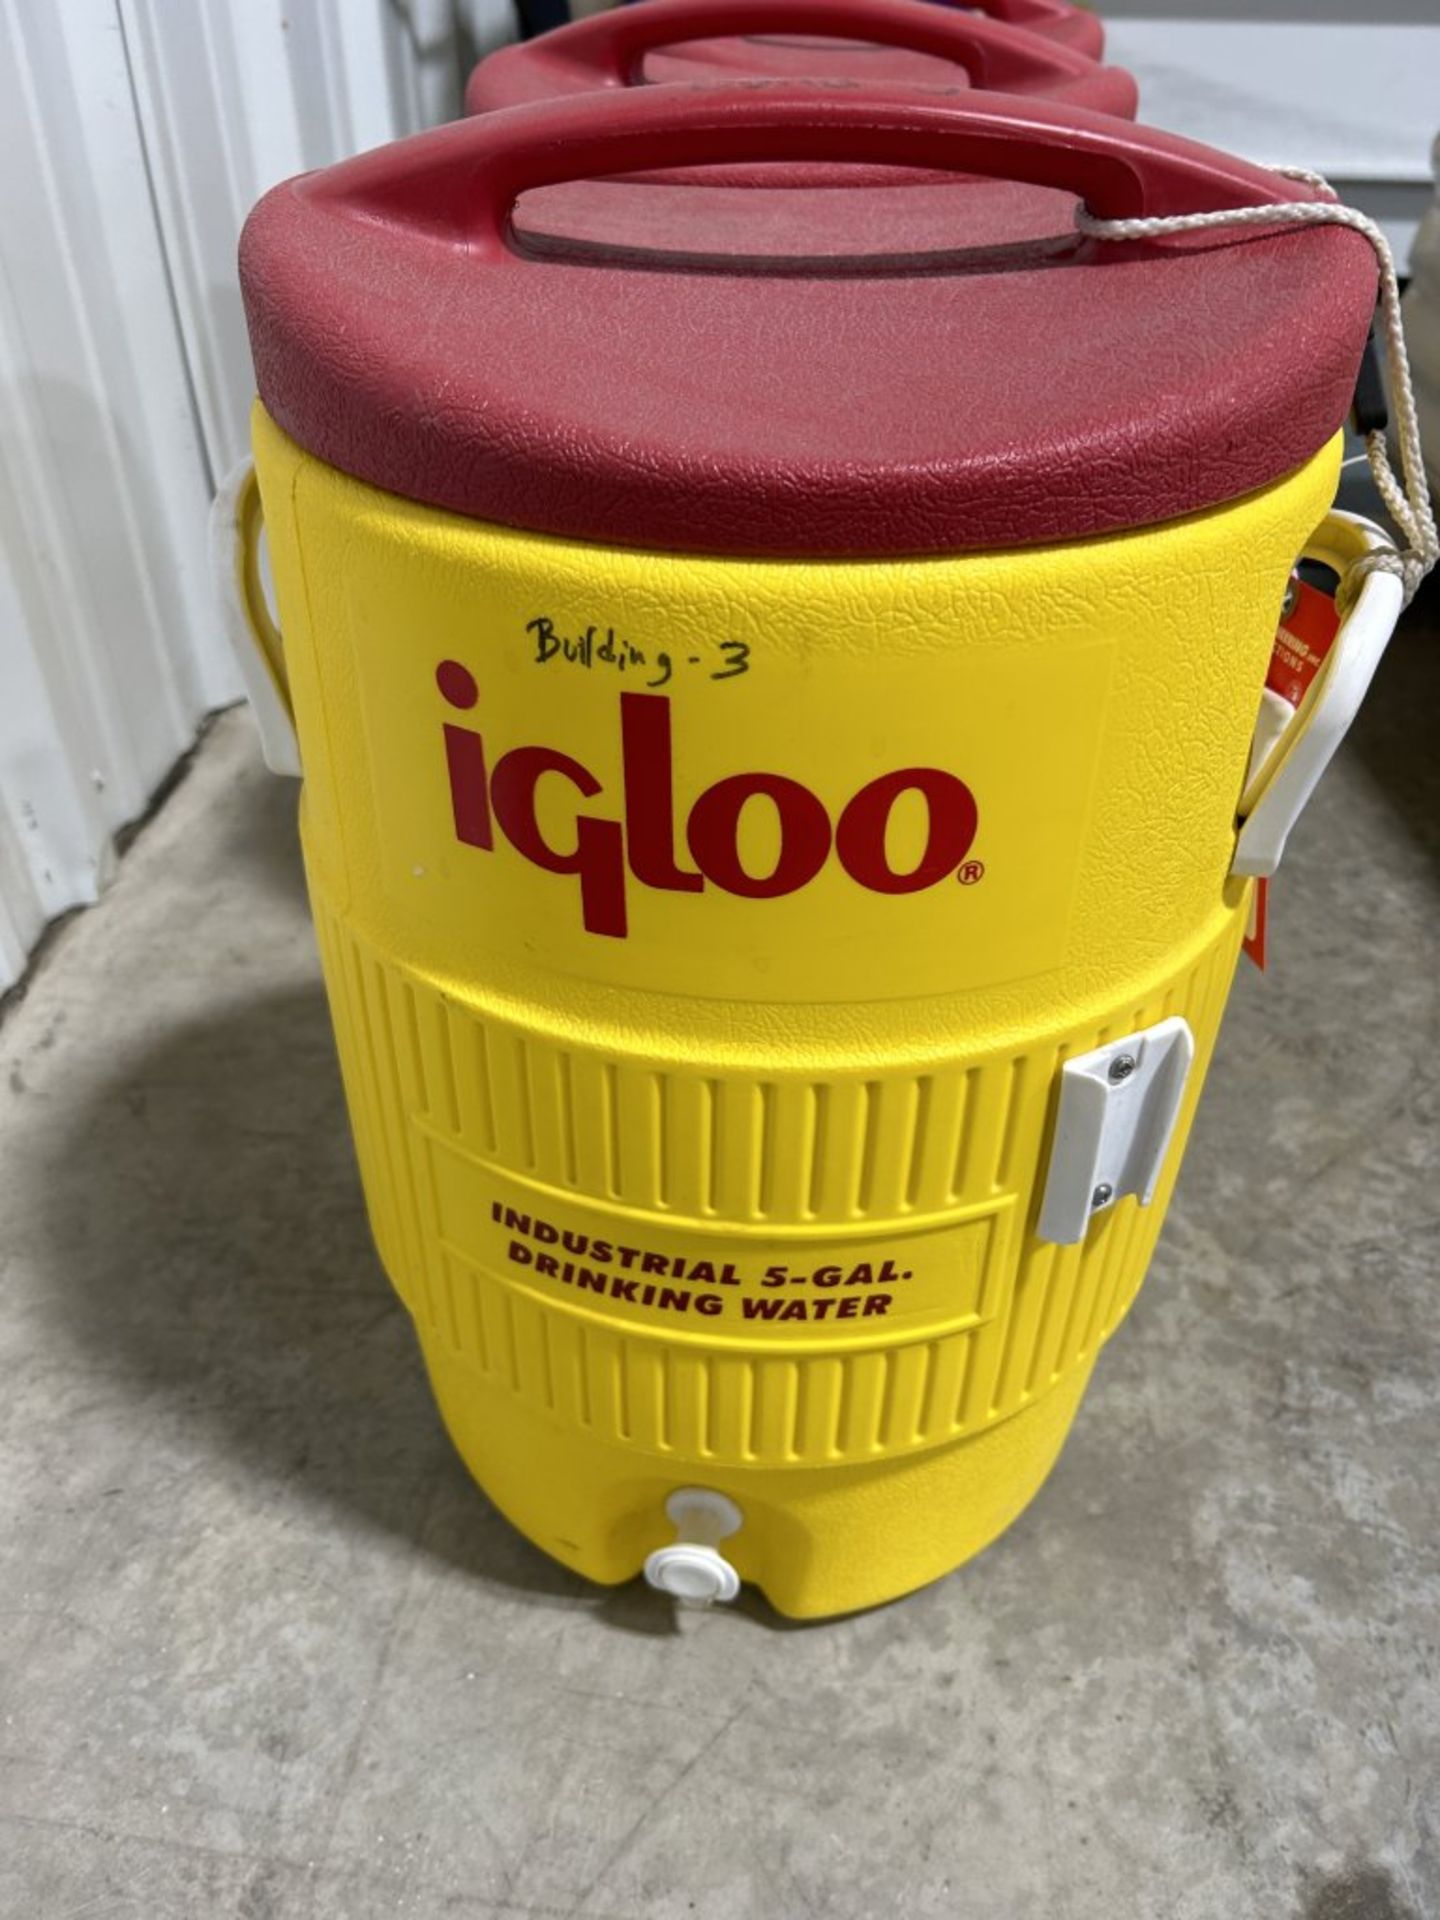 IGLOO 5-GALLON INDUSTRIAL DRINK COOLERS, (3) - Image 2 of 3